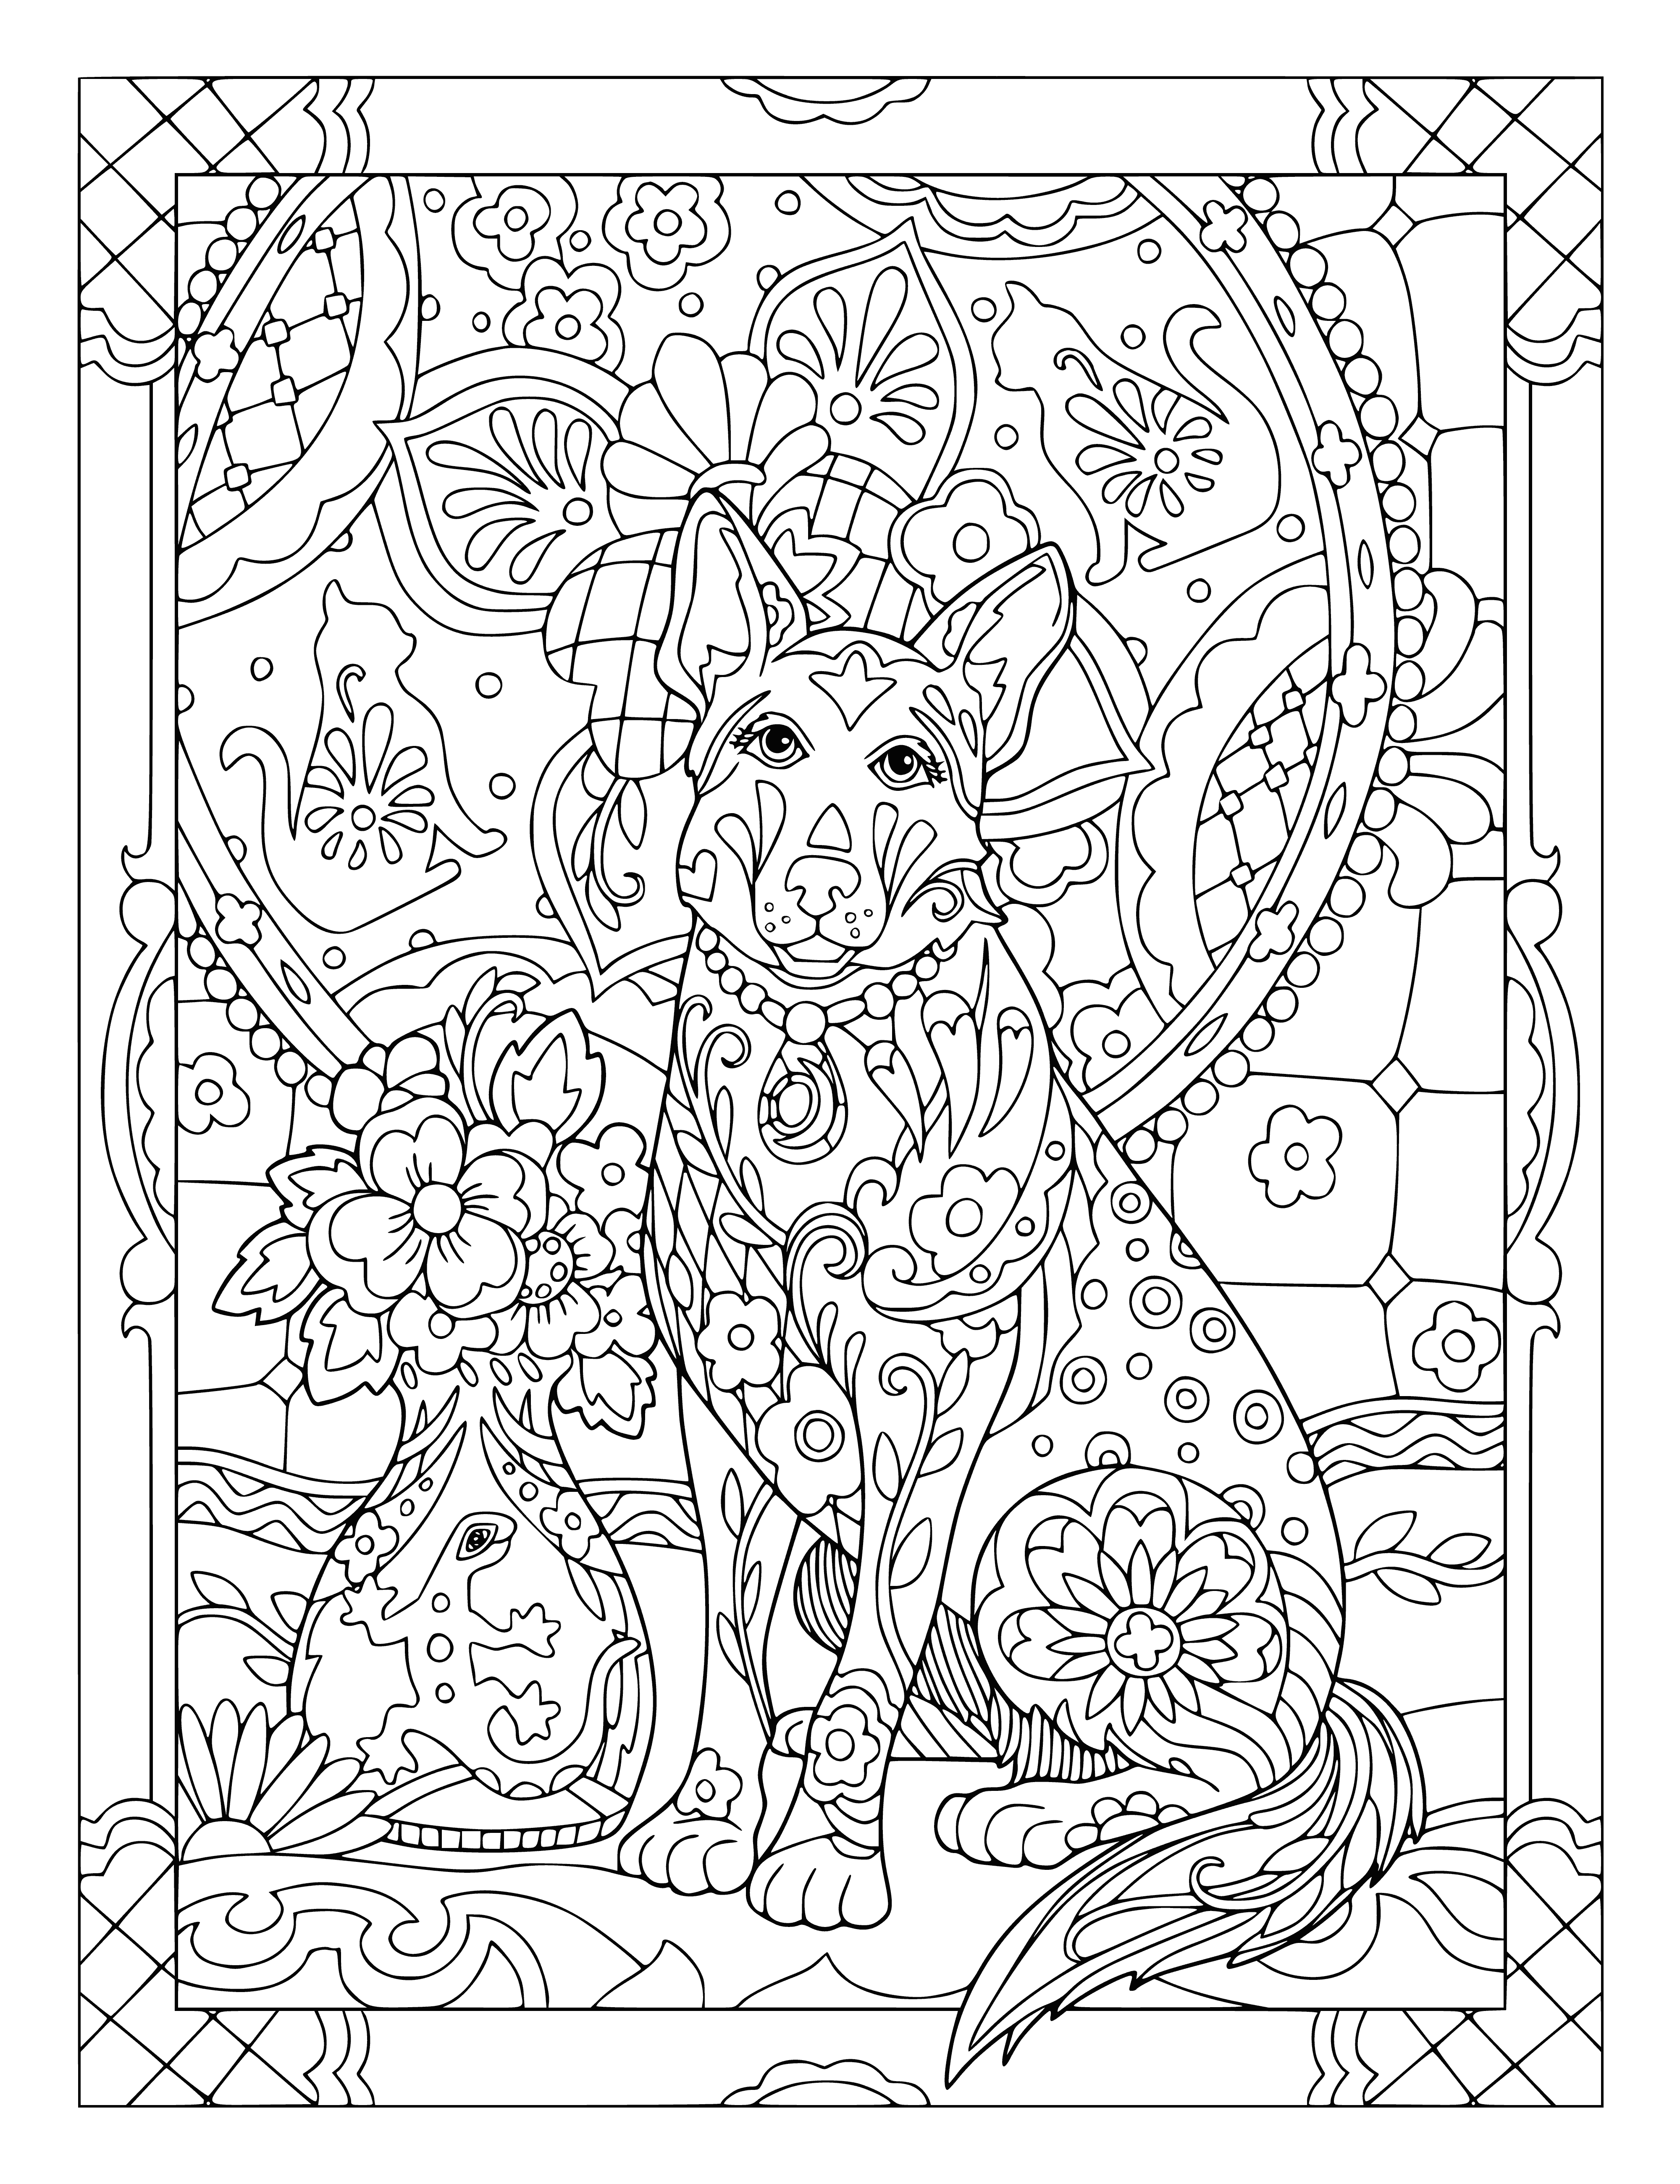 coloring page: Woman sits with a vase of flowers, petting a peaceful dog at her feet.